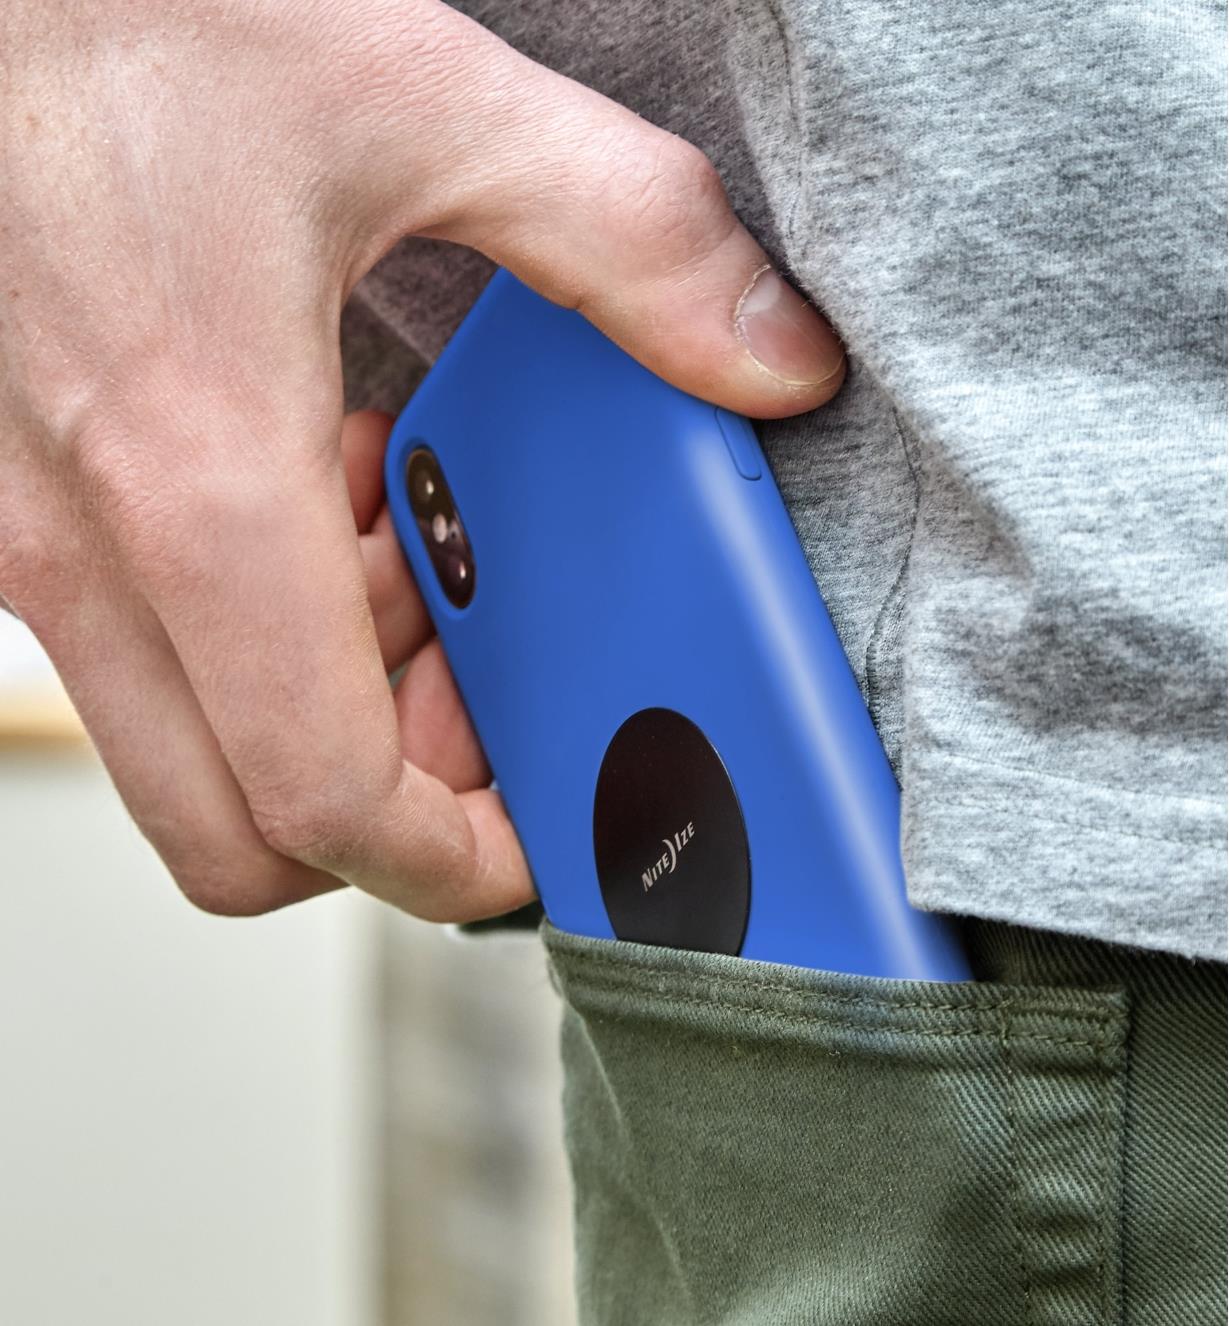 Slipping a cell phone with a steel disc attached to its case into a pants pocket